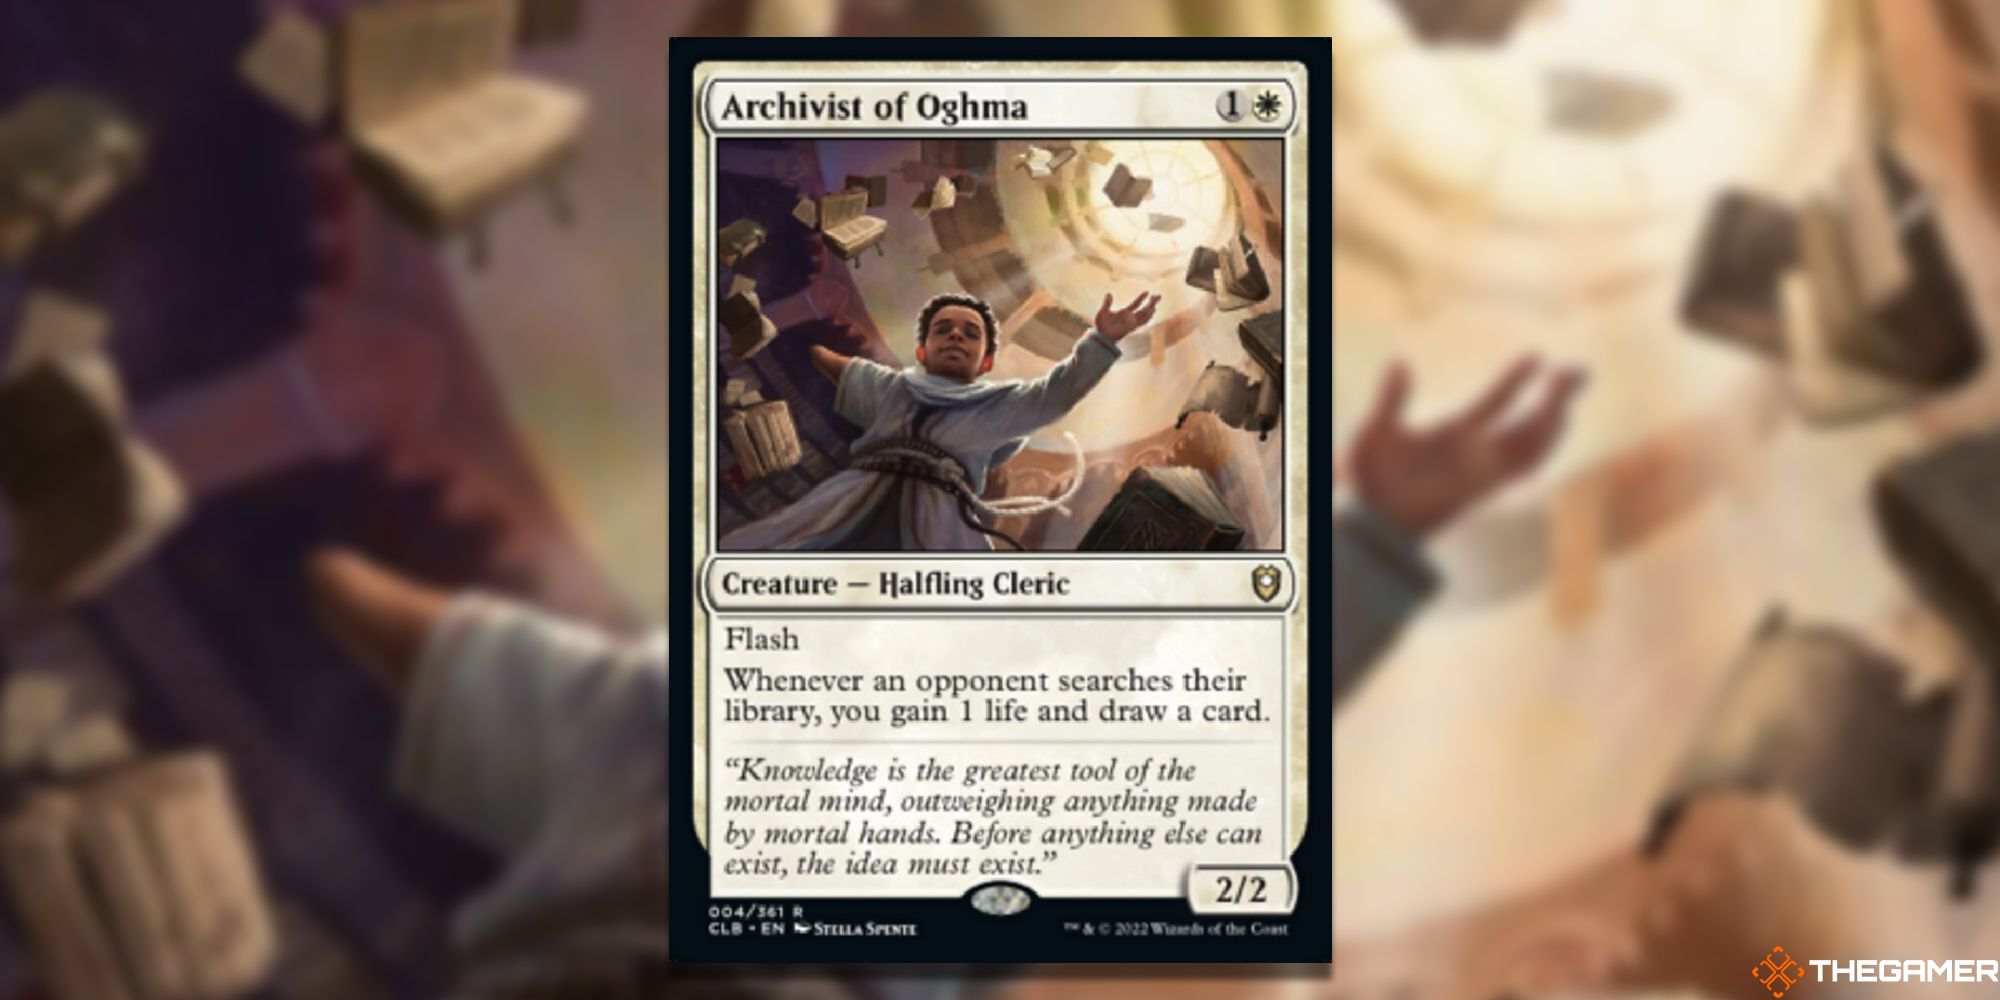 Magic: The Gathering Archivist of Oghma full card with background